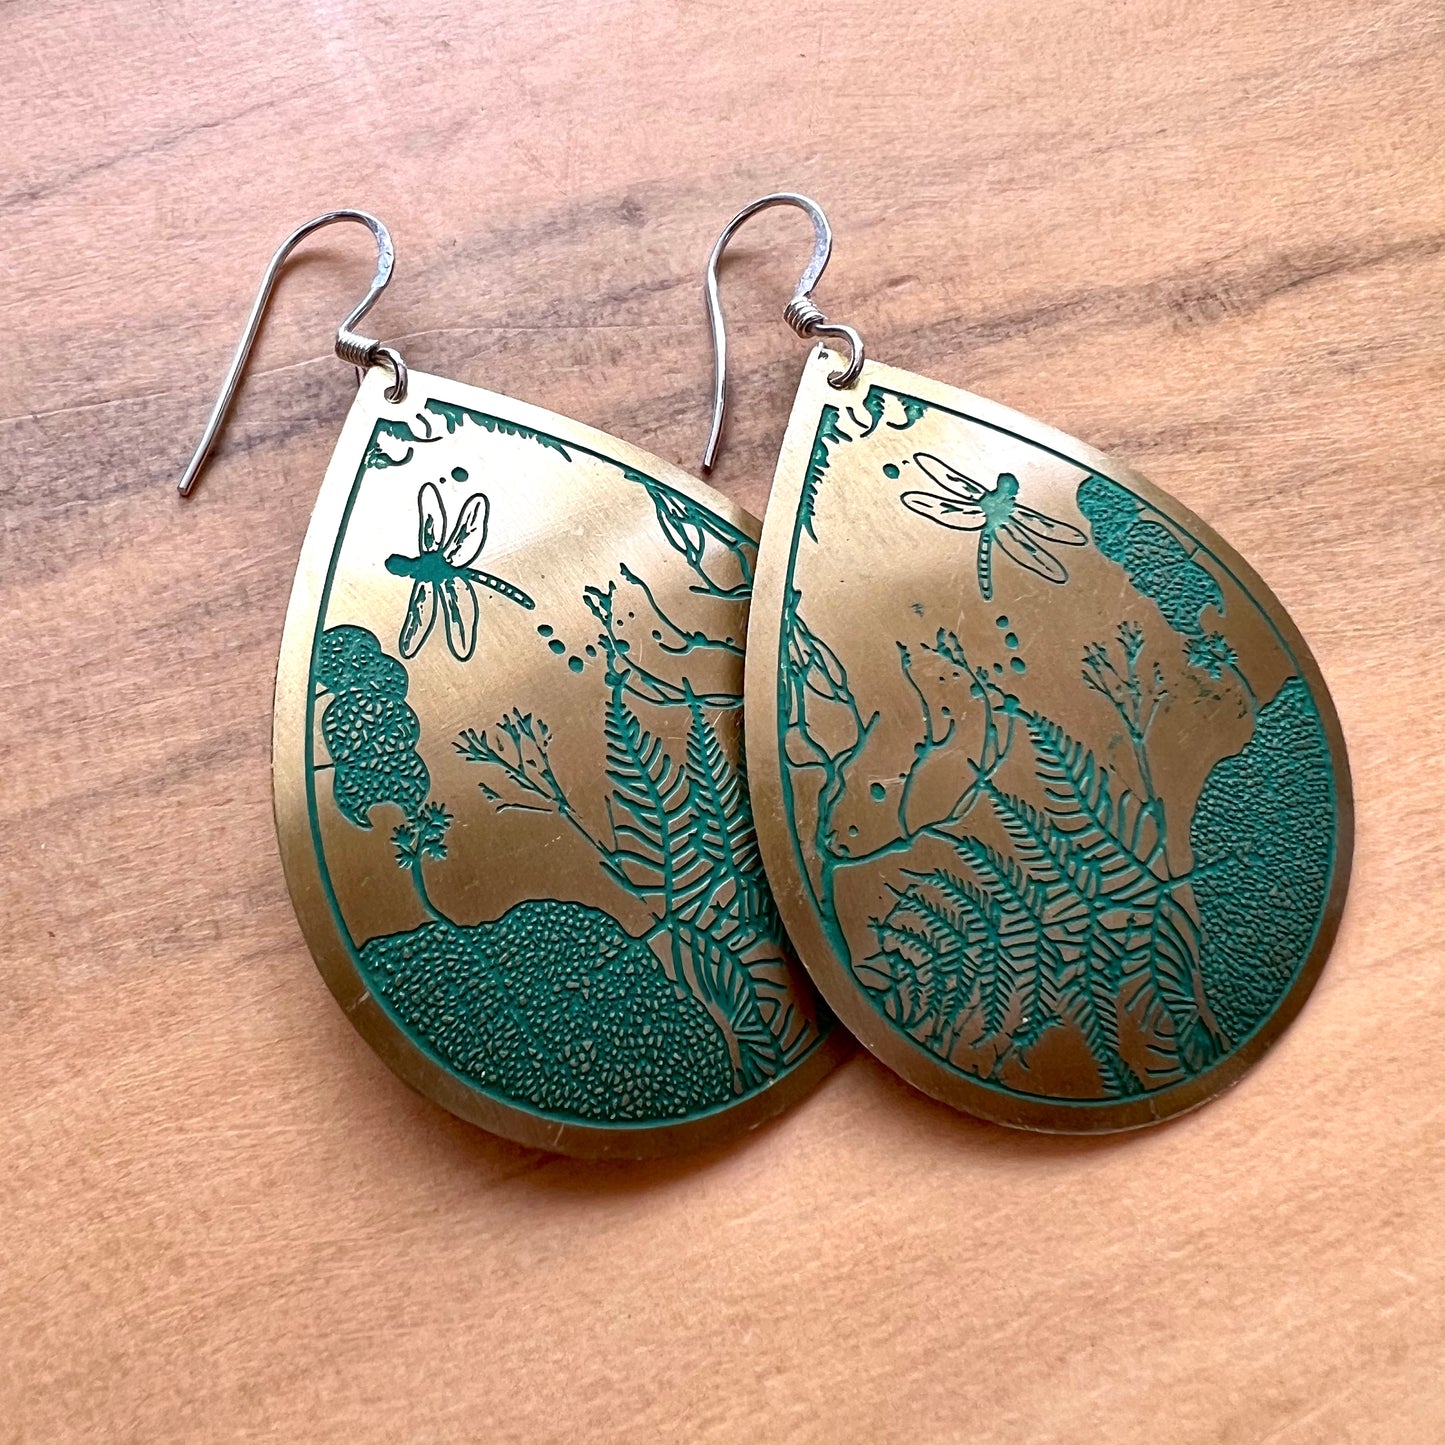 Etched Brass Metal Earrings - Medium Dragonfly